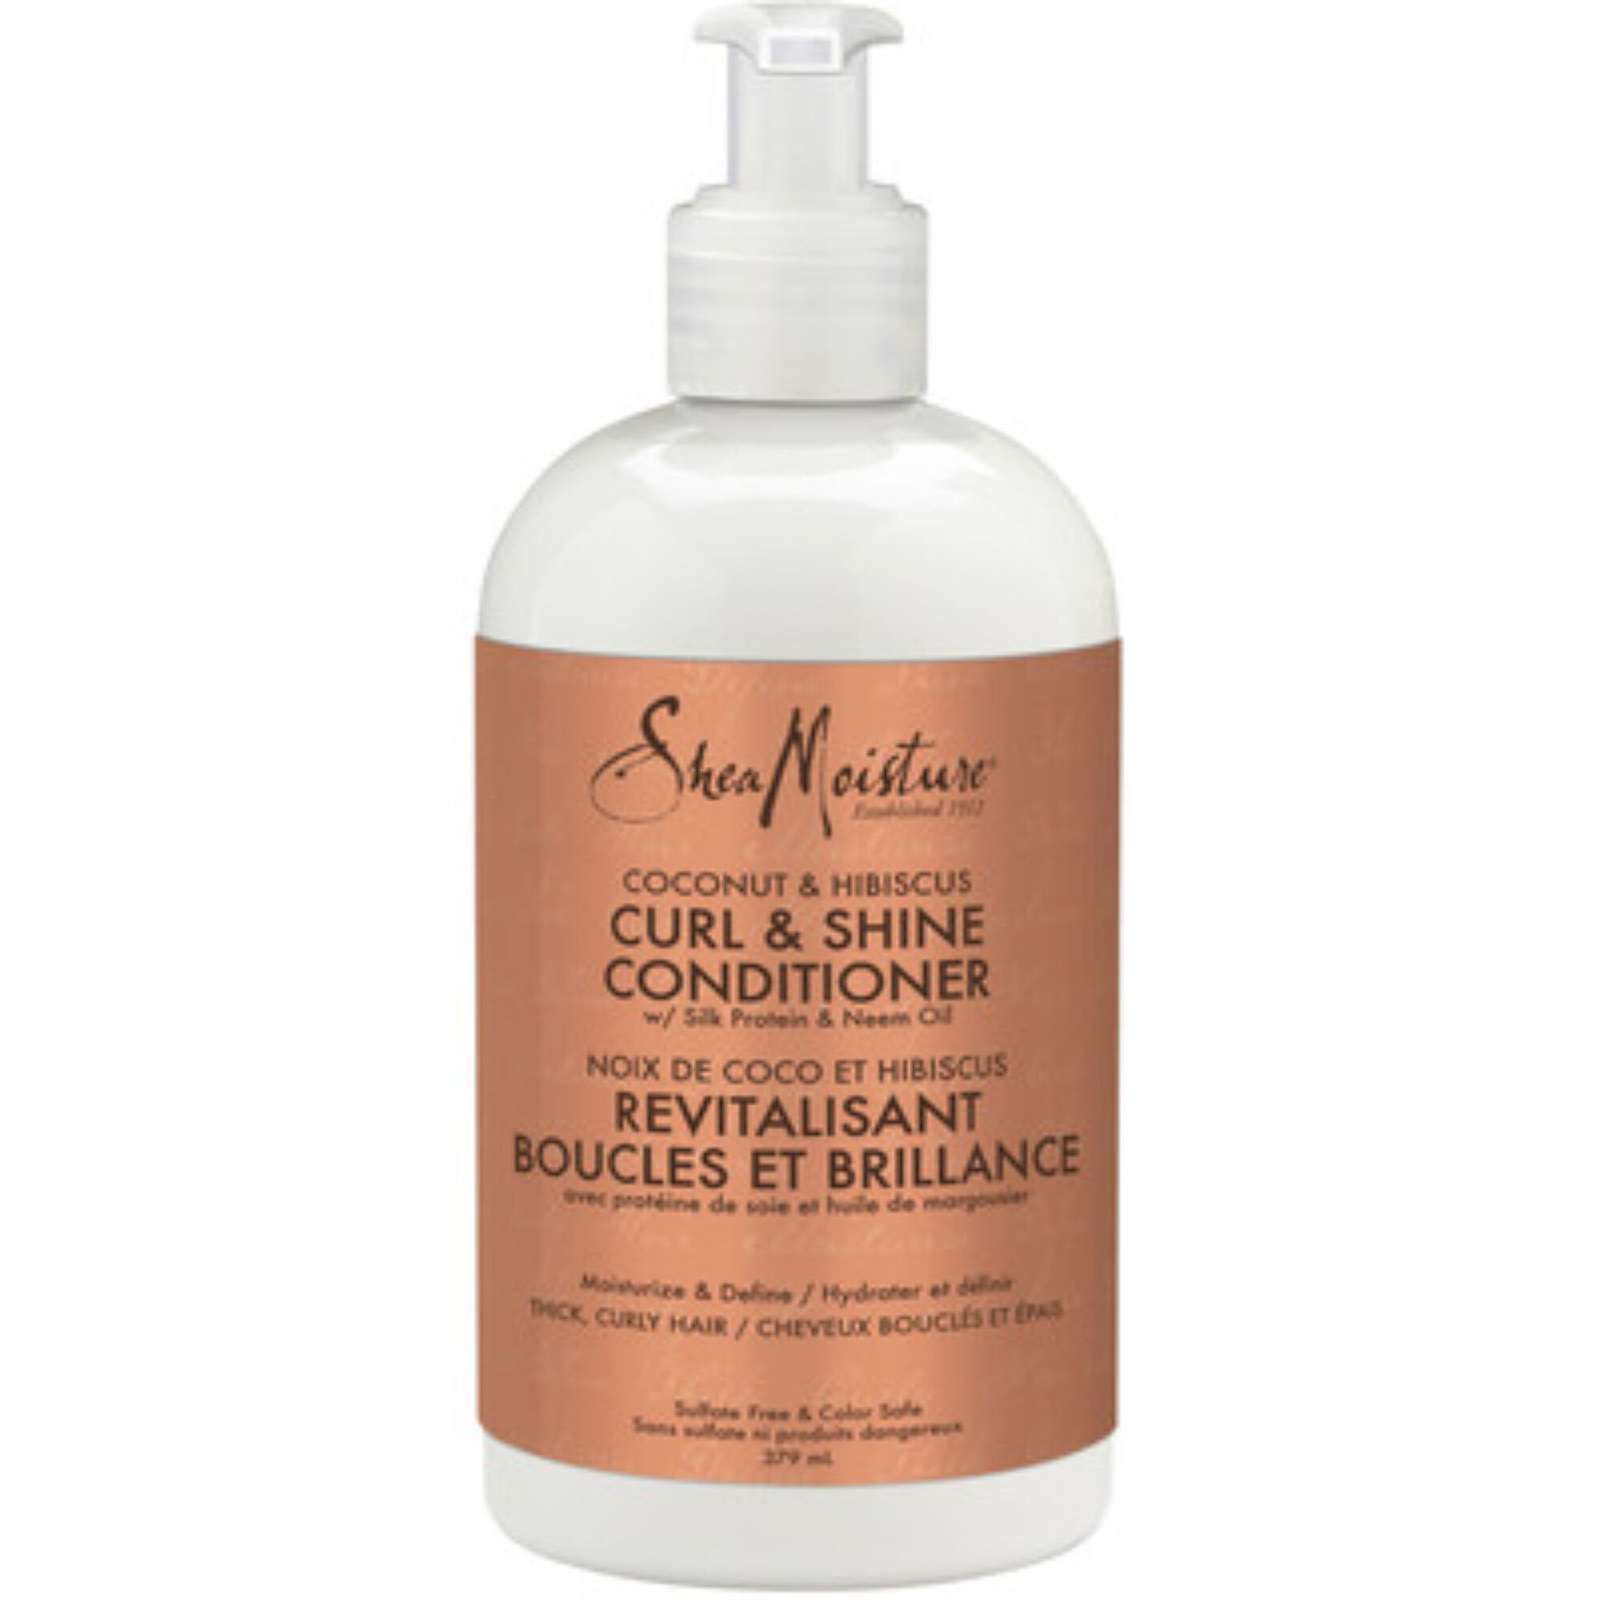 Coconut & Hibiscus Curl & Shine Conditioner | Shoppers Drug Mart – Beauty